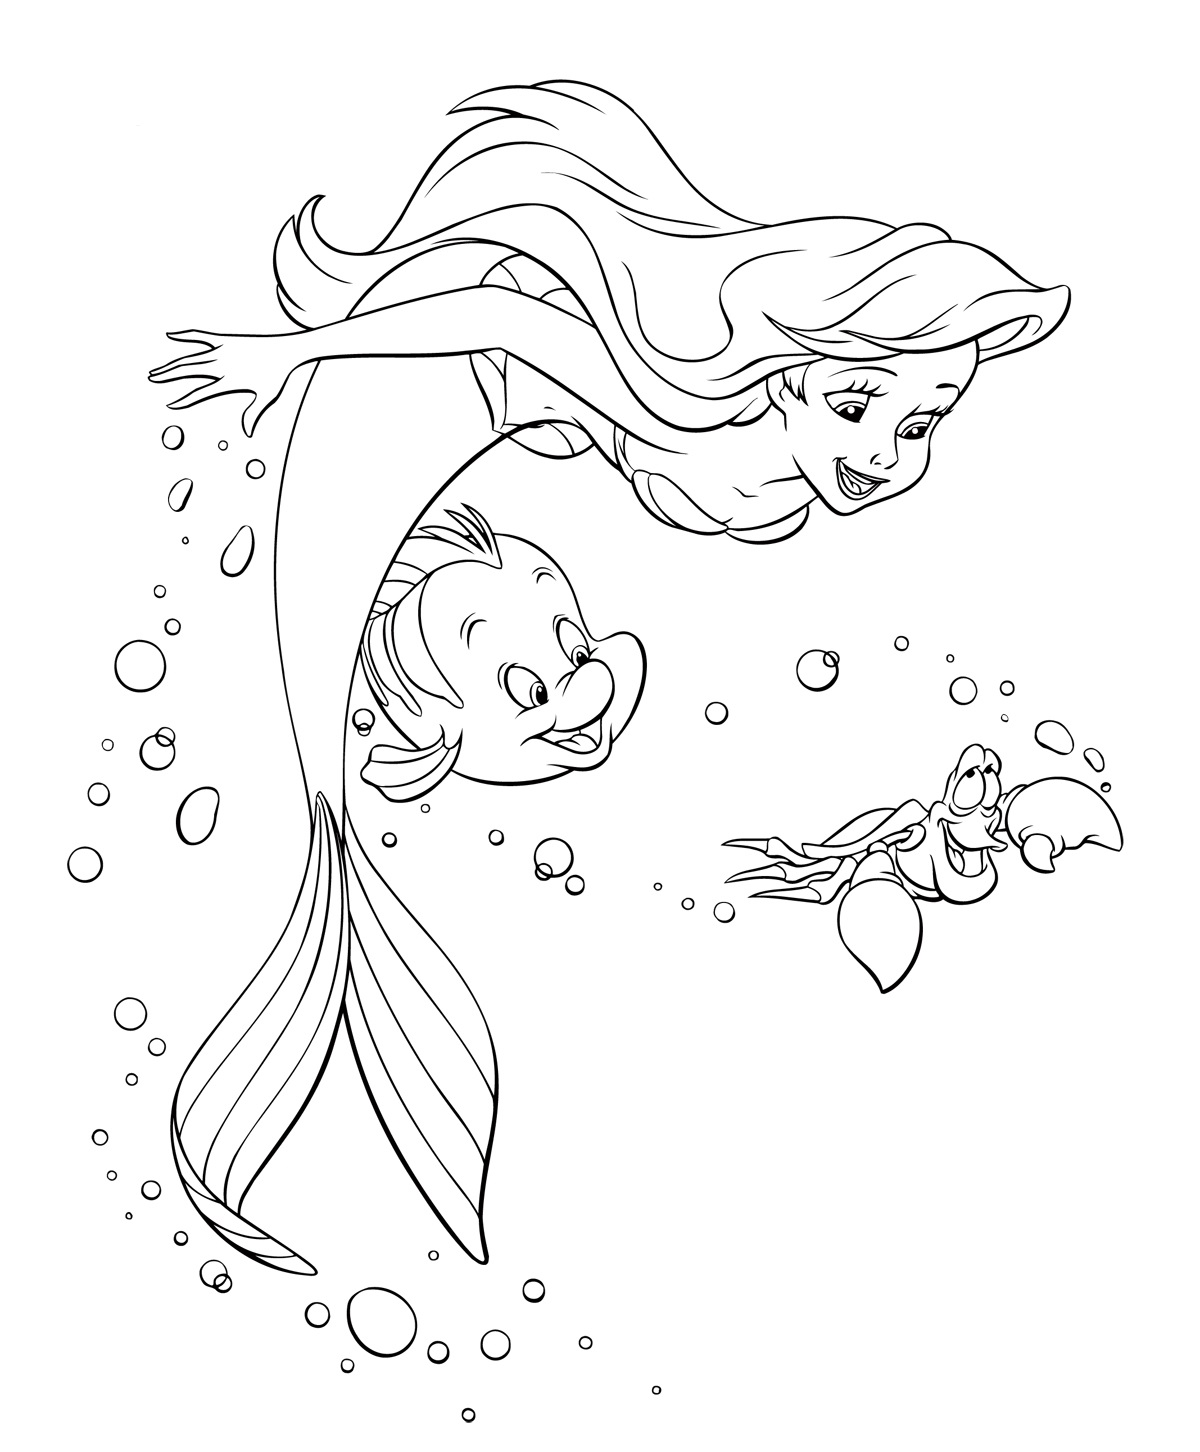 Ariel the Little Mermaid coloring pages for girls to print for free